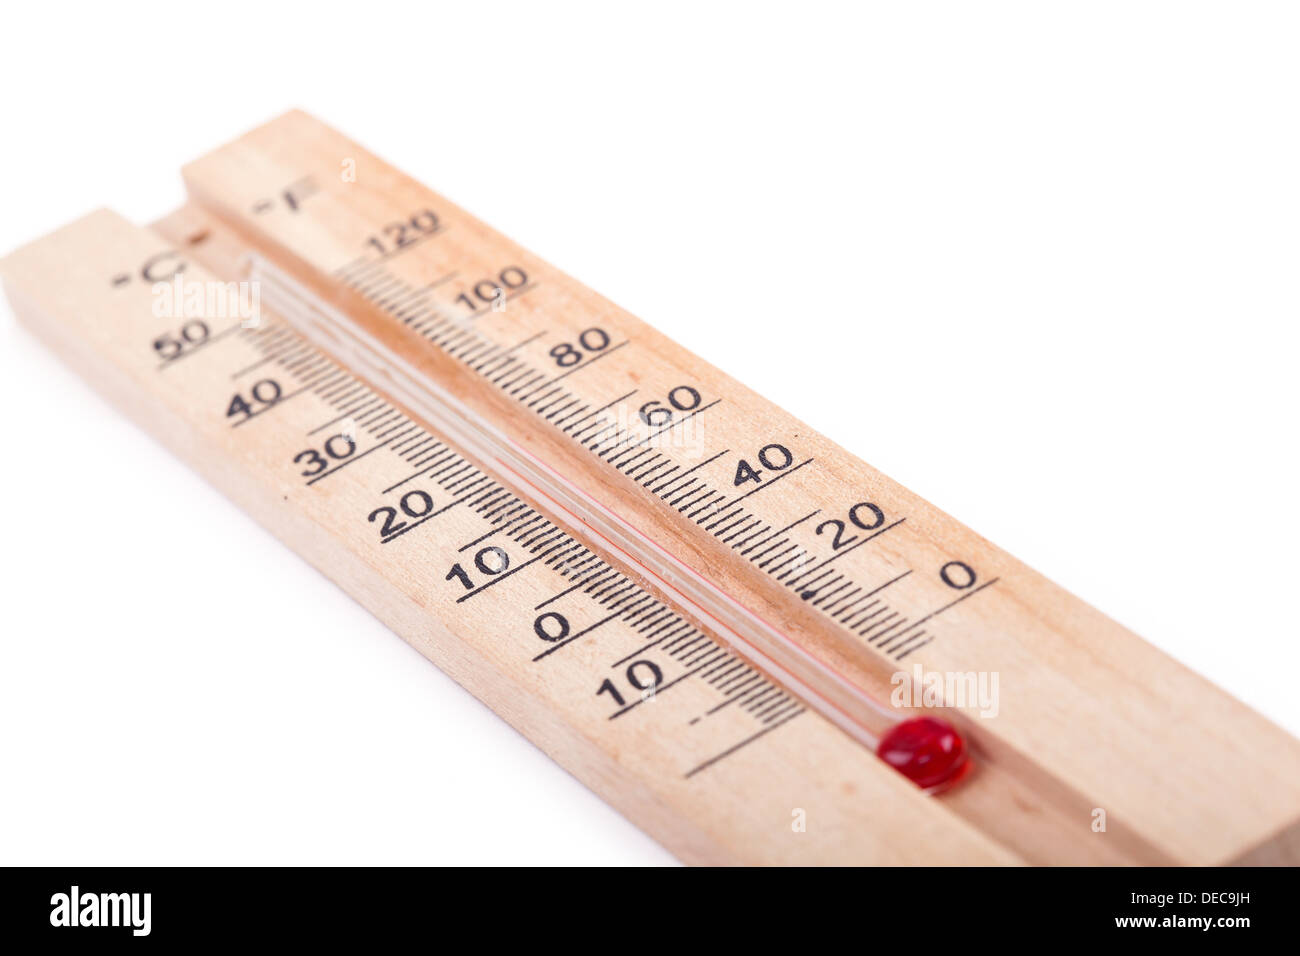 https://c8.alamy.com/comp/DEC9JH/atmospheric-wooden-thermometer-closeup-on-white-background-DEC9JH.jpg